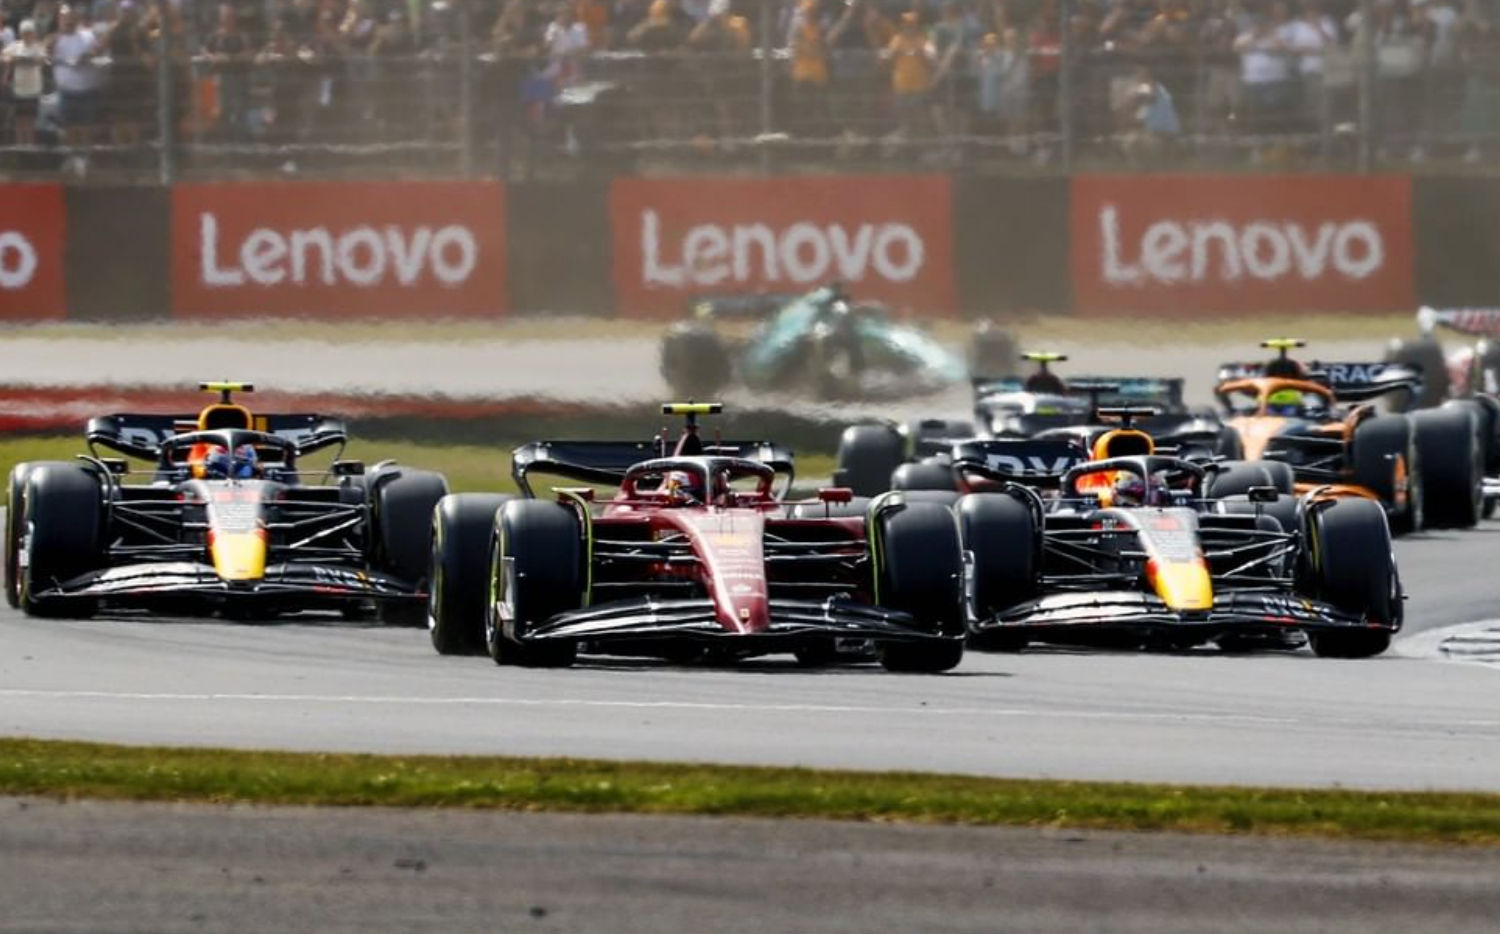 F1: Winners, losers (and Max Verstappen) from the 2022 British Grand Prix